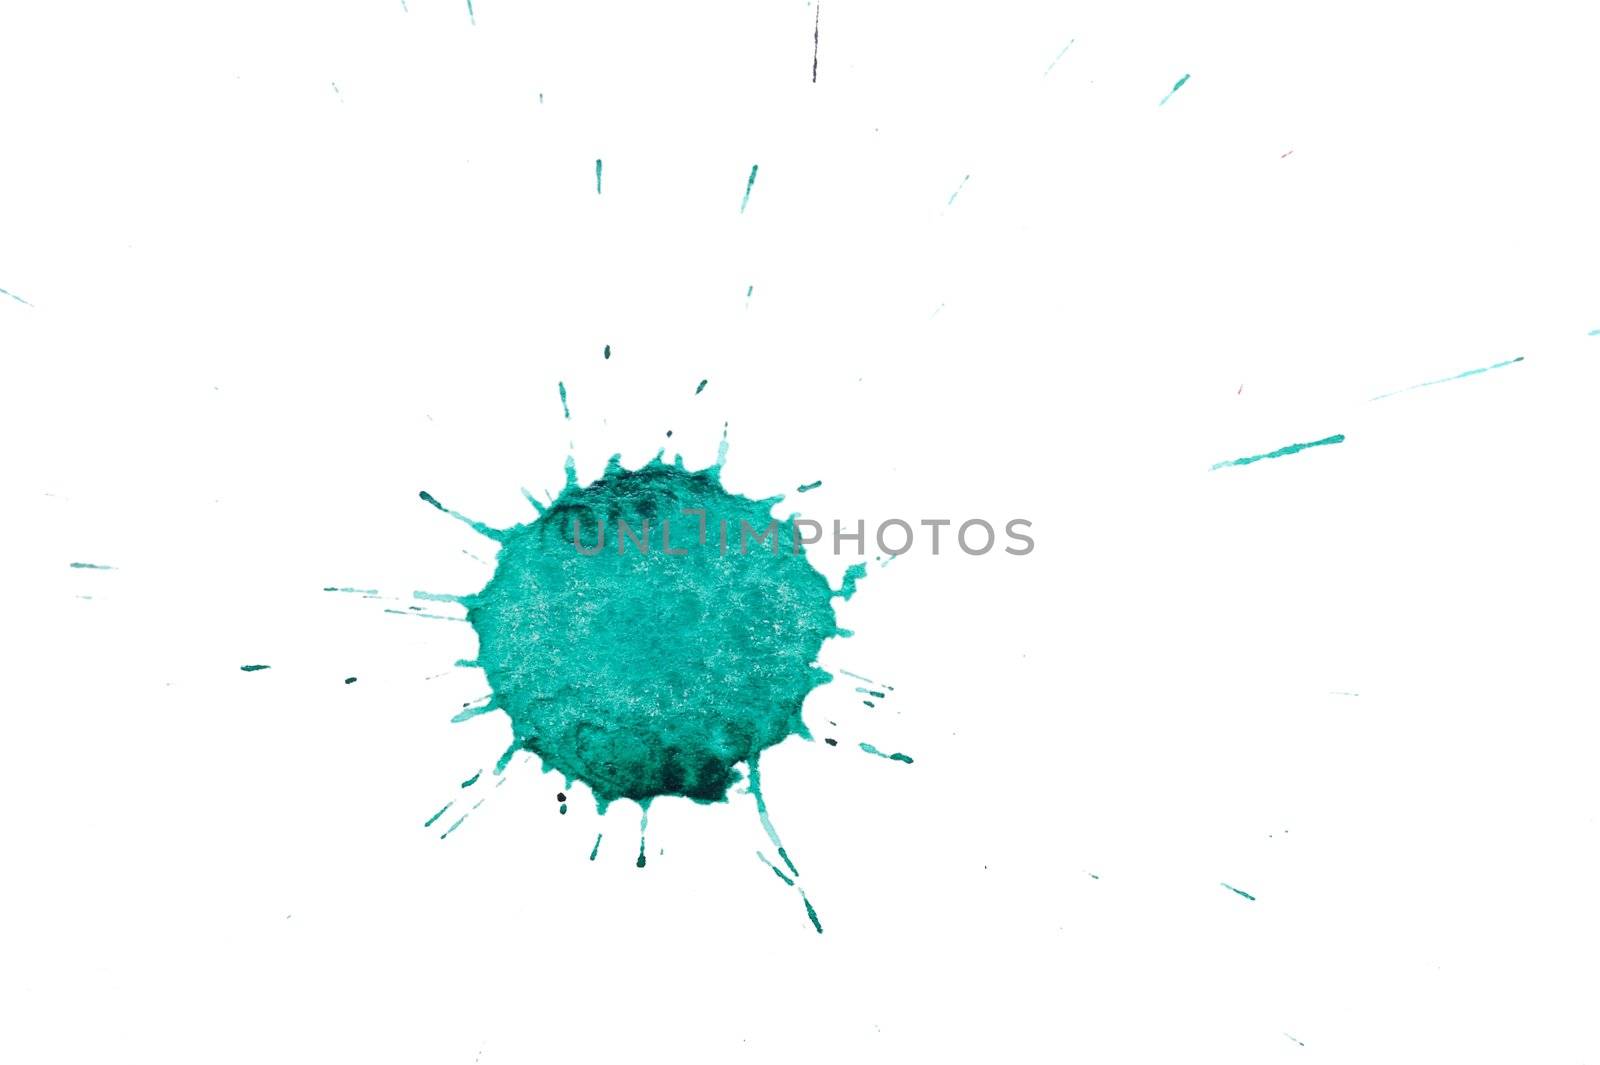 An image of green spot on white background